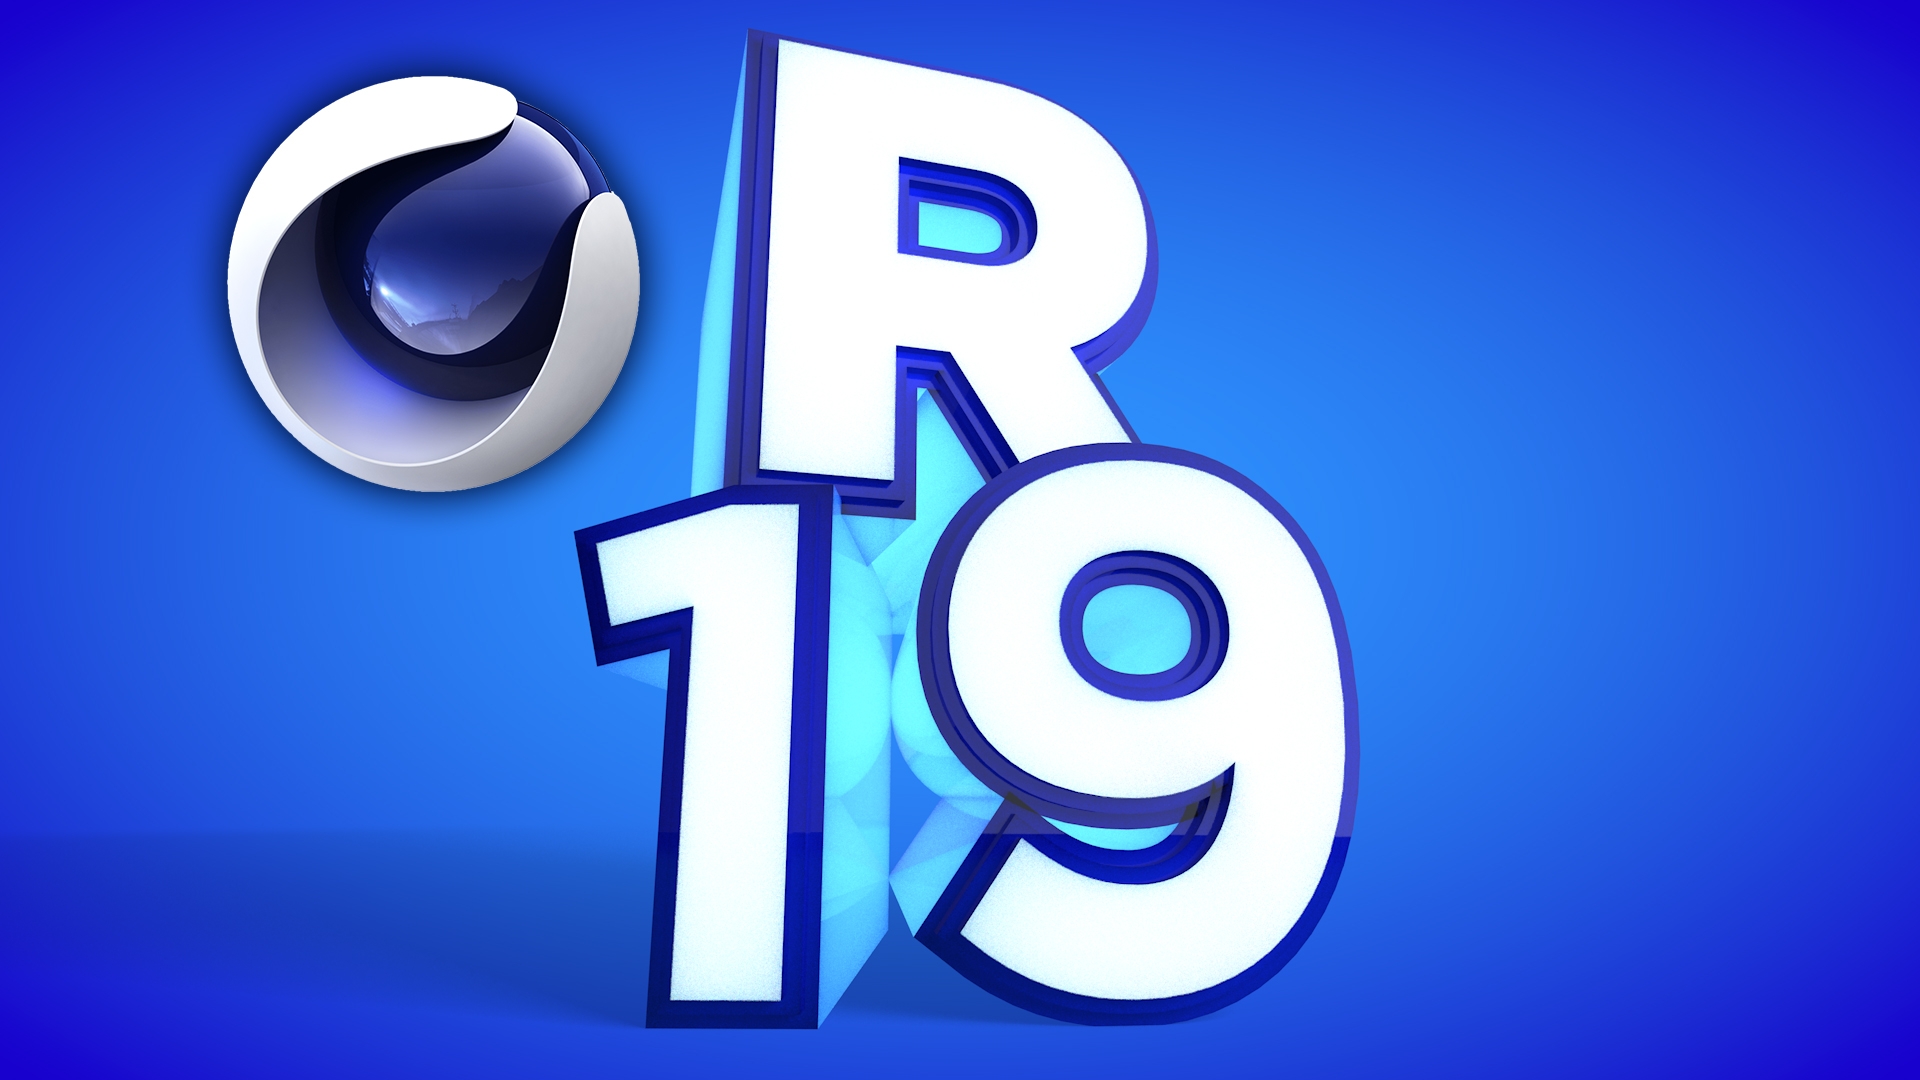  Check out all new features, updates, and tips for working Cinema 4D R19   Cinema 4D R19 Coverage   See New Features  